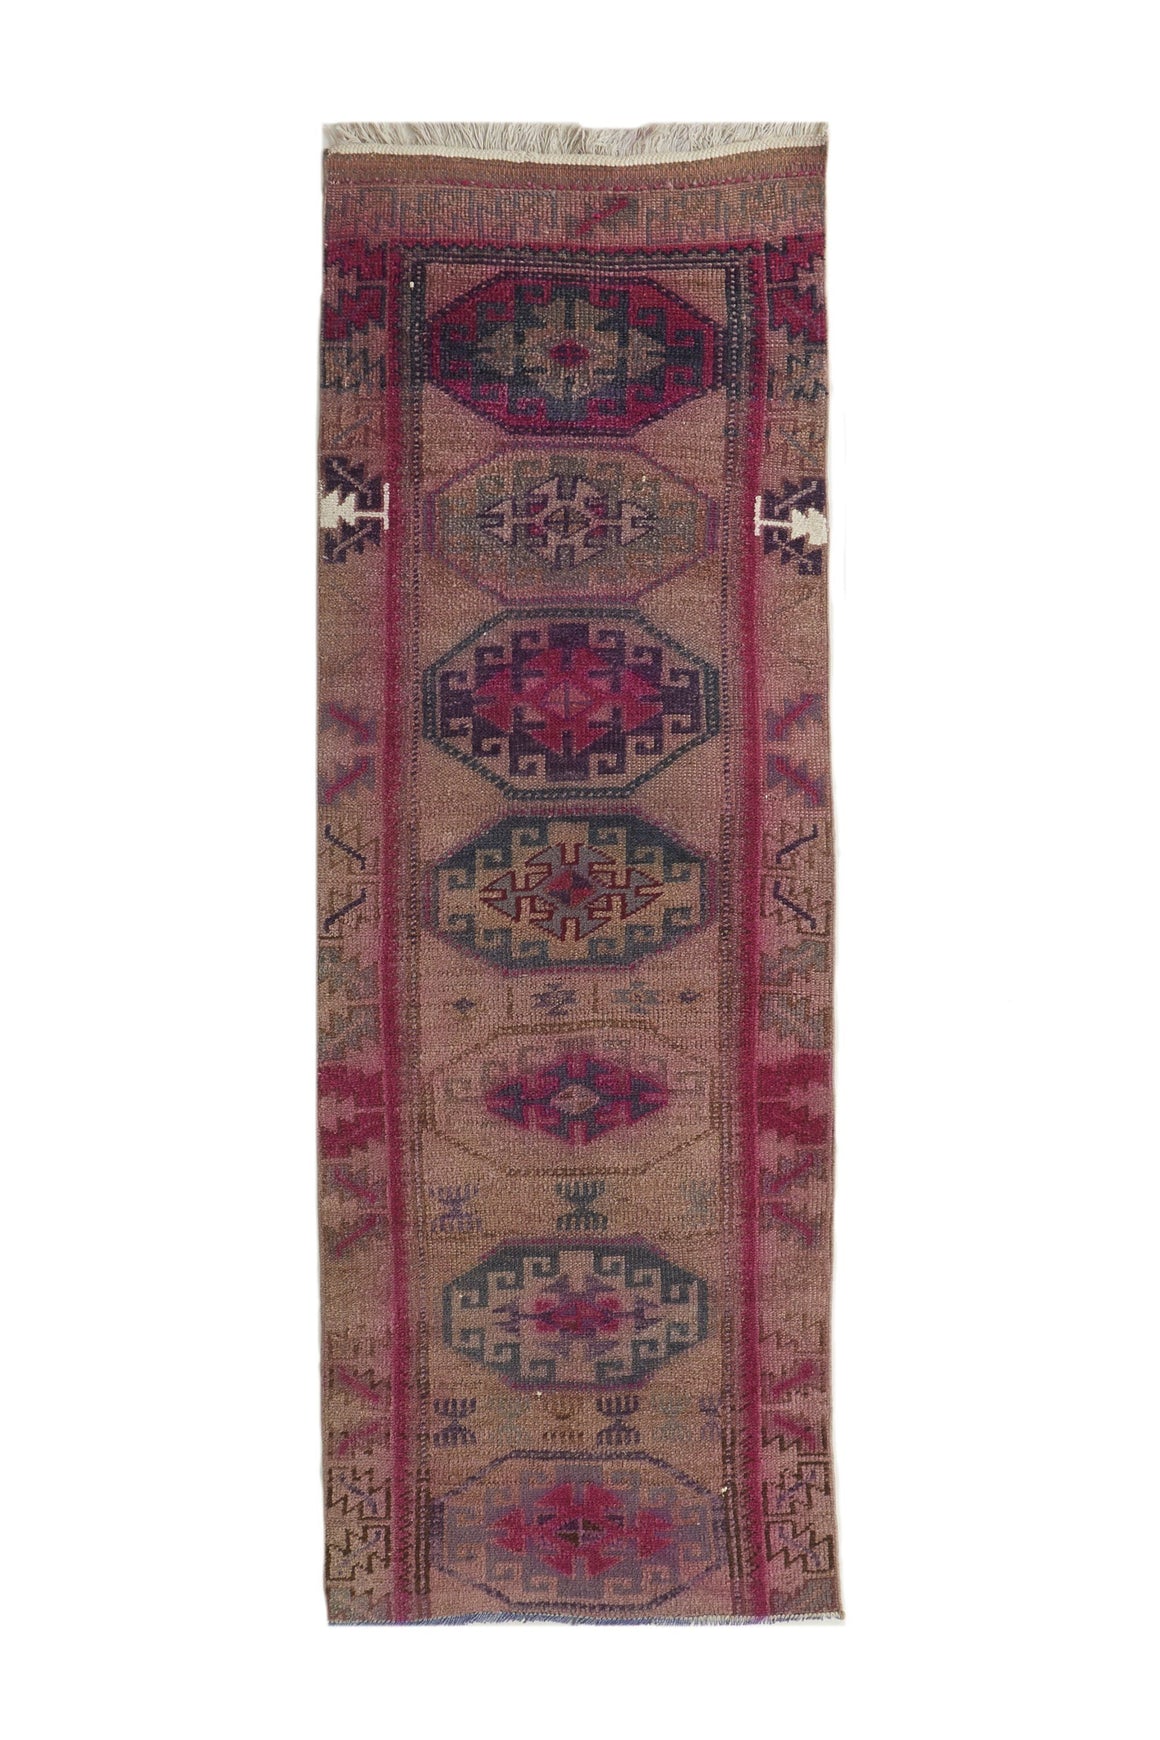 'Concord' Vintage Turkish Runner Rug - 2'8" x 8' - Canary Lane - Curated Textiles